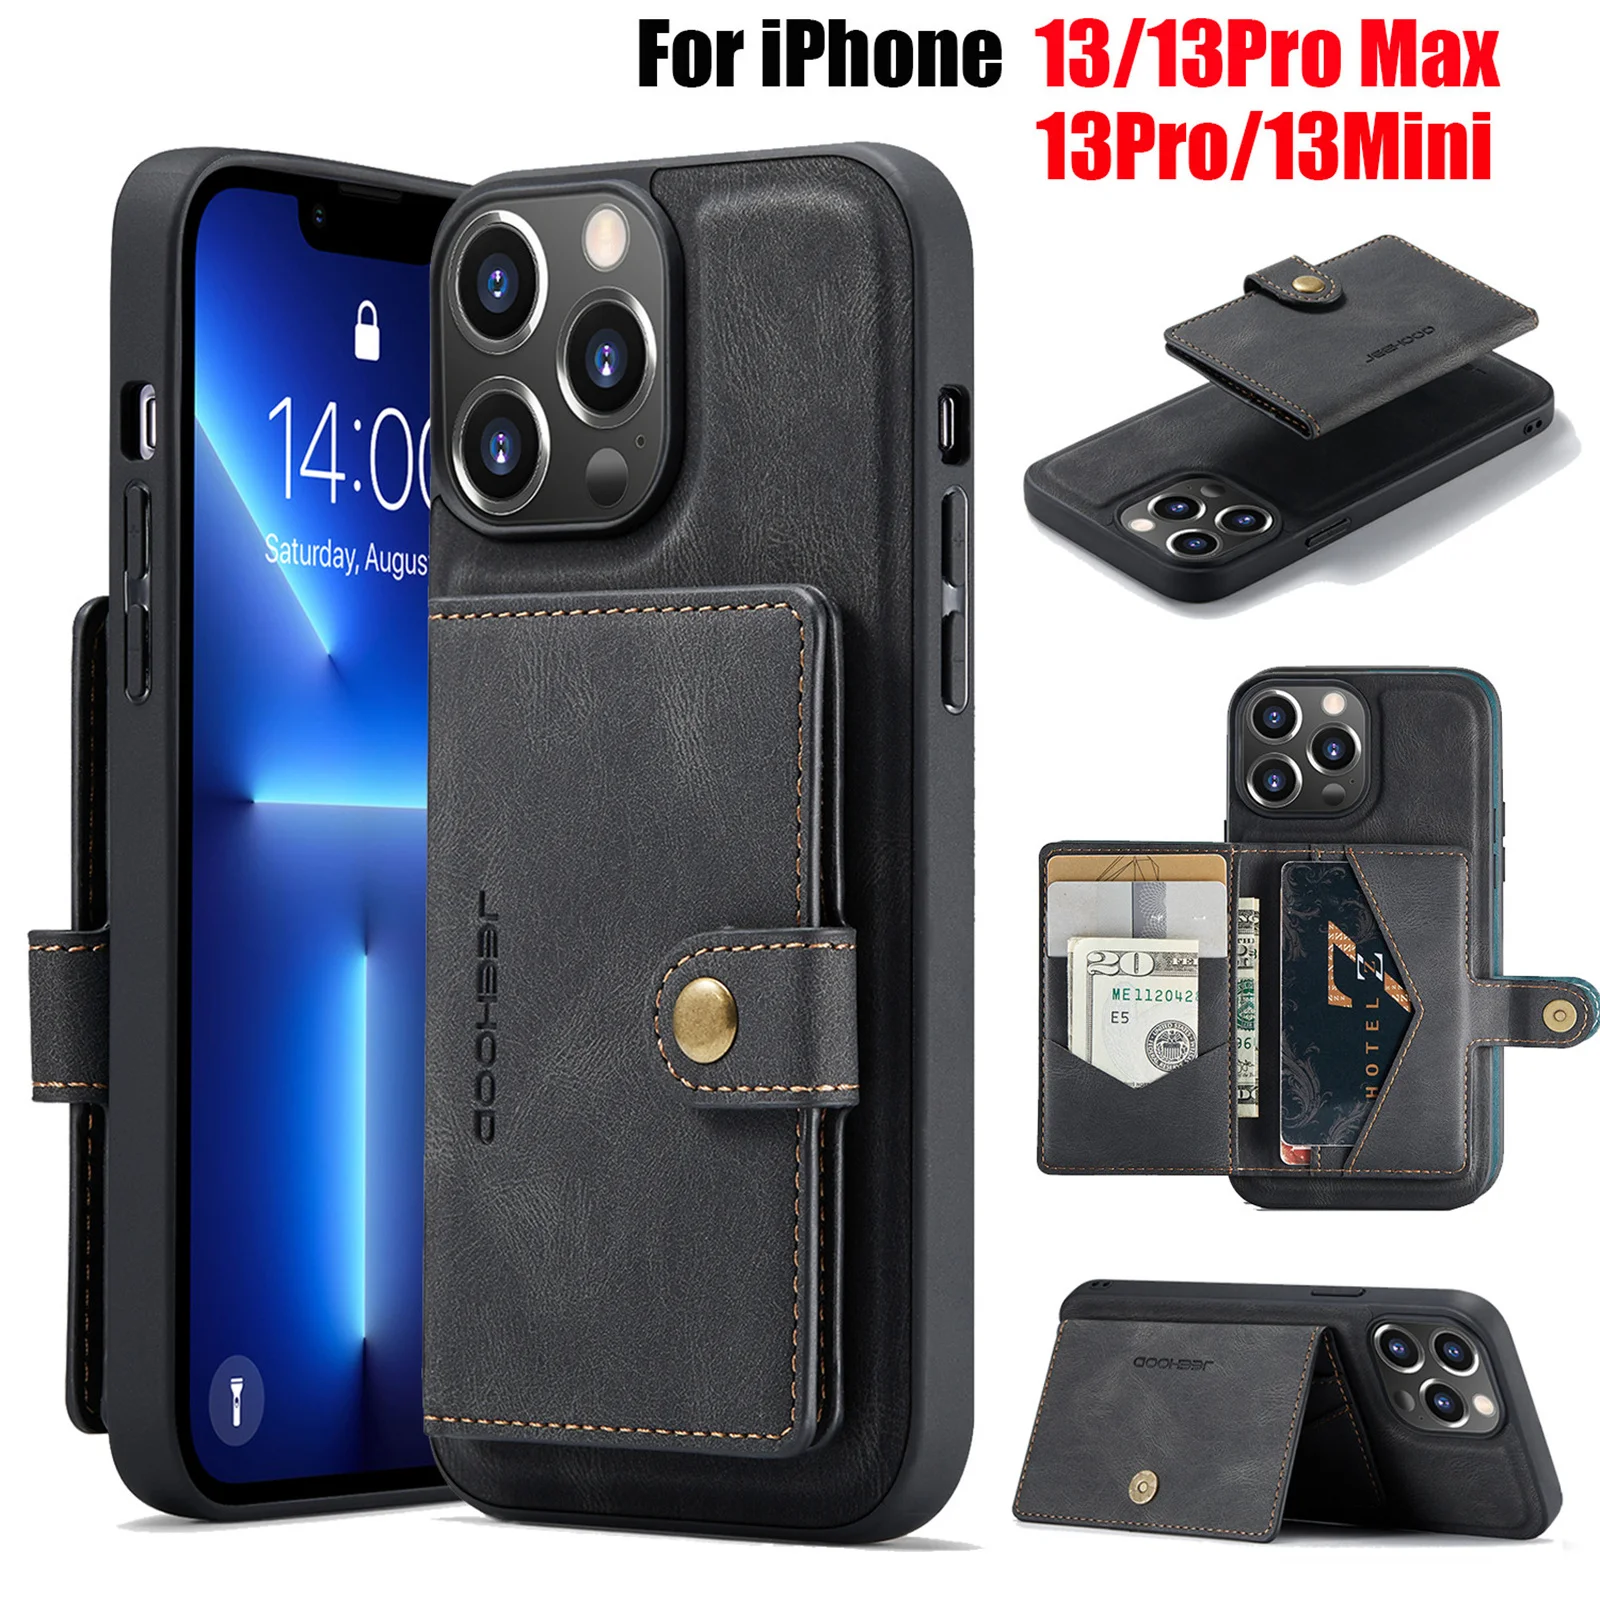 case iphone 13  2 in 1 Detachable Back Cover For iPhone 13 12 11 Pro Max Mini Wallet Case with Card Holder Magnetic Leather Pocket Slim case iphone 13 